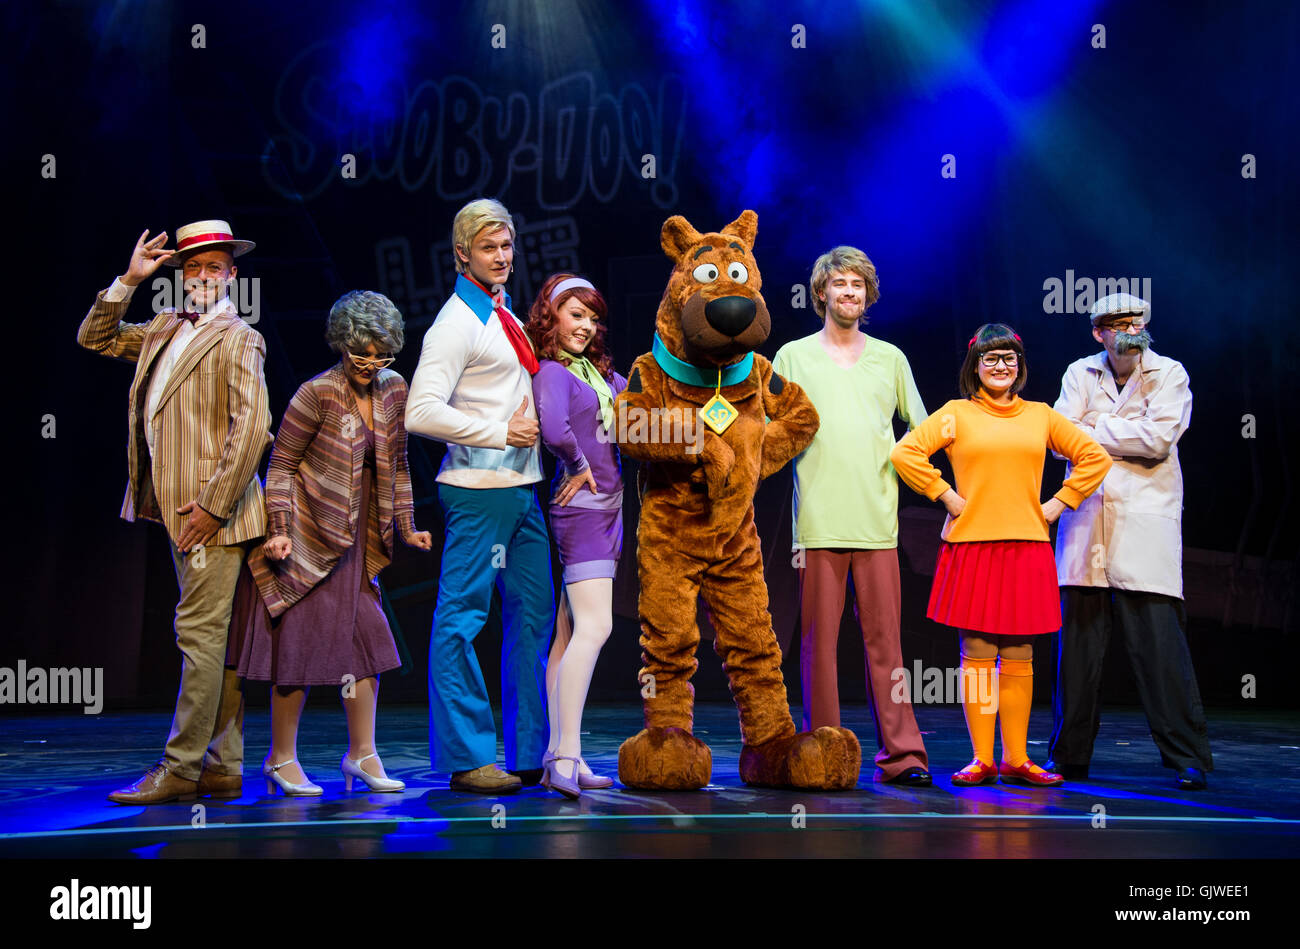 London, UK. 17th August, 2016. Cast members on stage during the photo call for the new Scooby Doo musical at the London Palladium, Daphne(Charlie Bull), Fred (Chris Warner Drake) Velma (Rebecca Withers), Shaggy (Charlie Haskins) Scooby-Doo (Joe Goldie), completing the cast areJohn Mcmanus, Martin Neely, Matt Parsons and Kate England Credit:  Alan D West/Alamy Live News Stock Photo